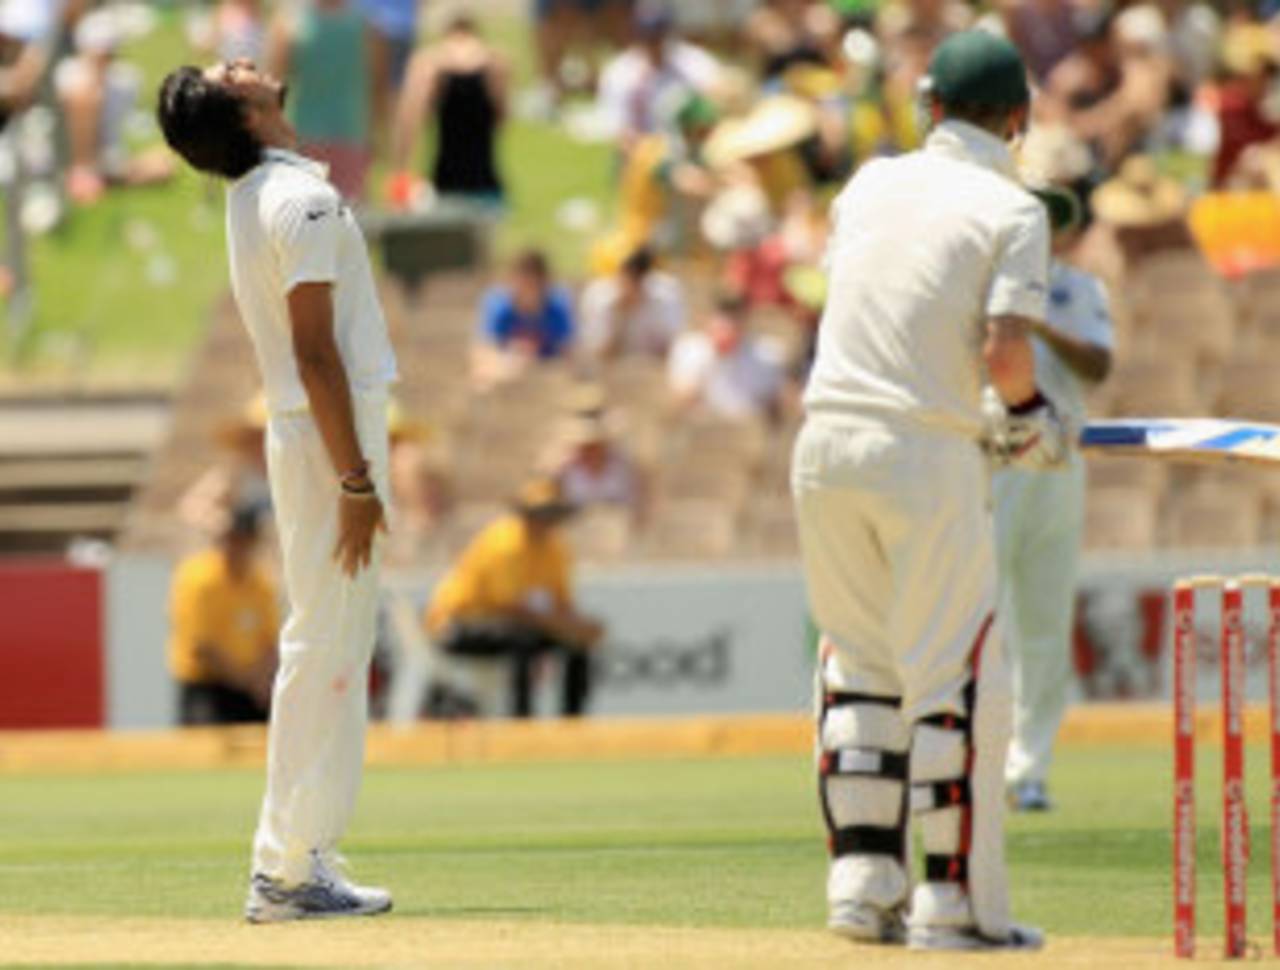 Easily the best bowler on show today, Ishant Sharma still doesn't have a wicket to show for it&nbsp;&nbsp;&bull;&nbsp;&nbsp;Getty Images